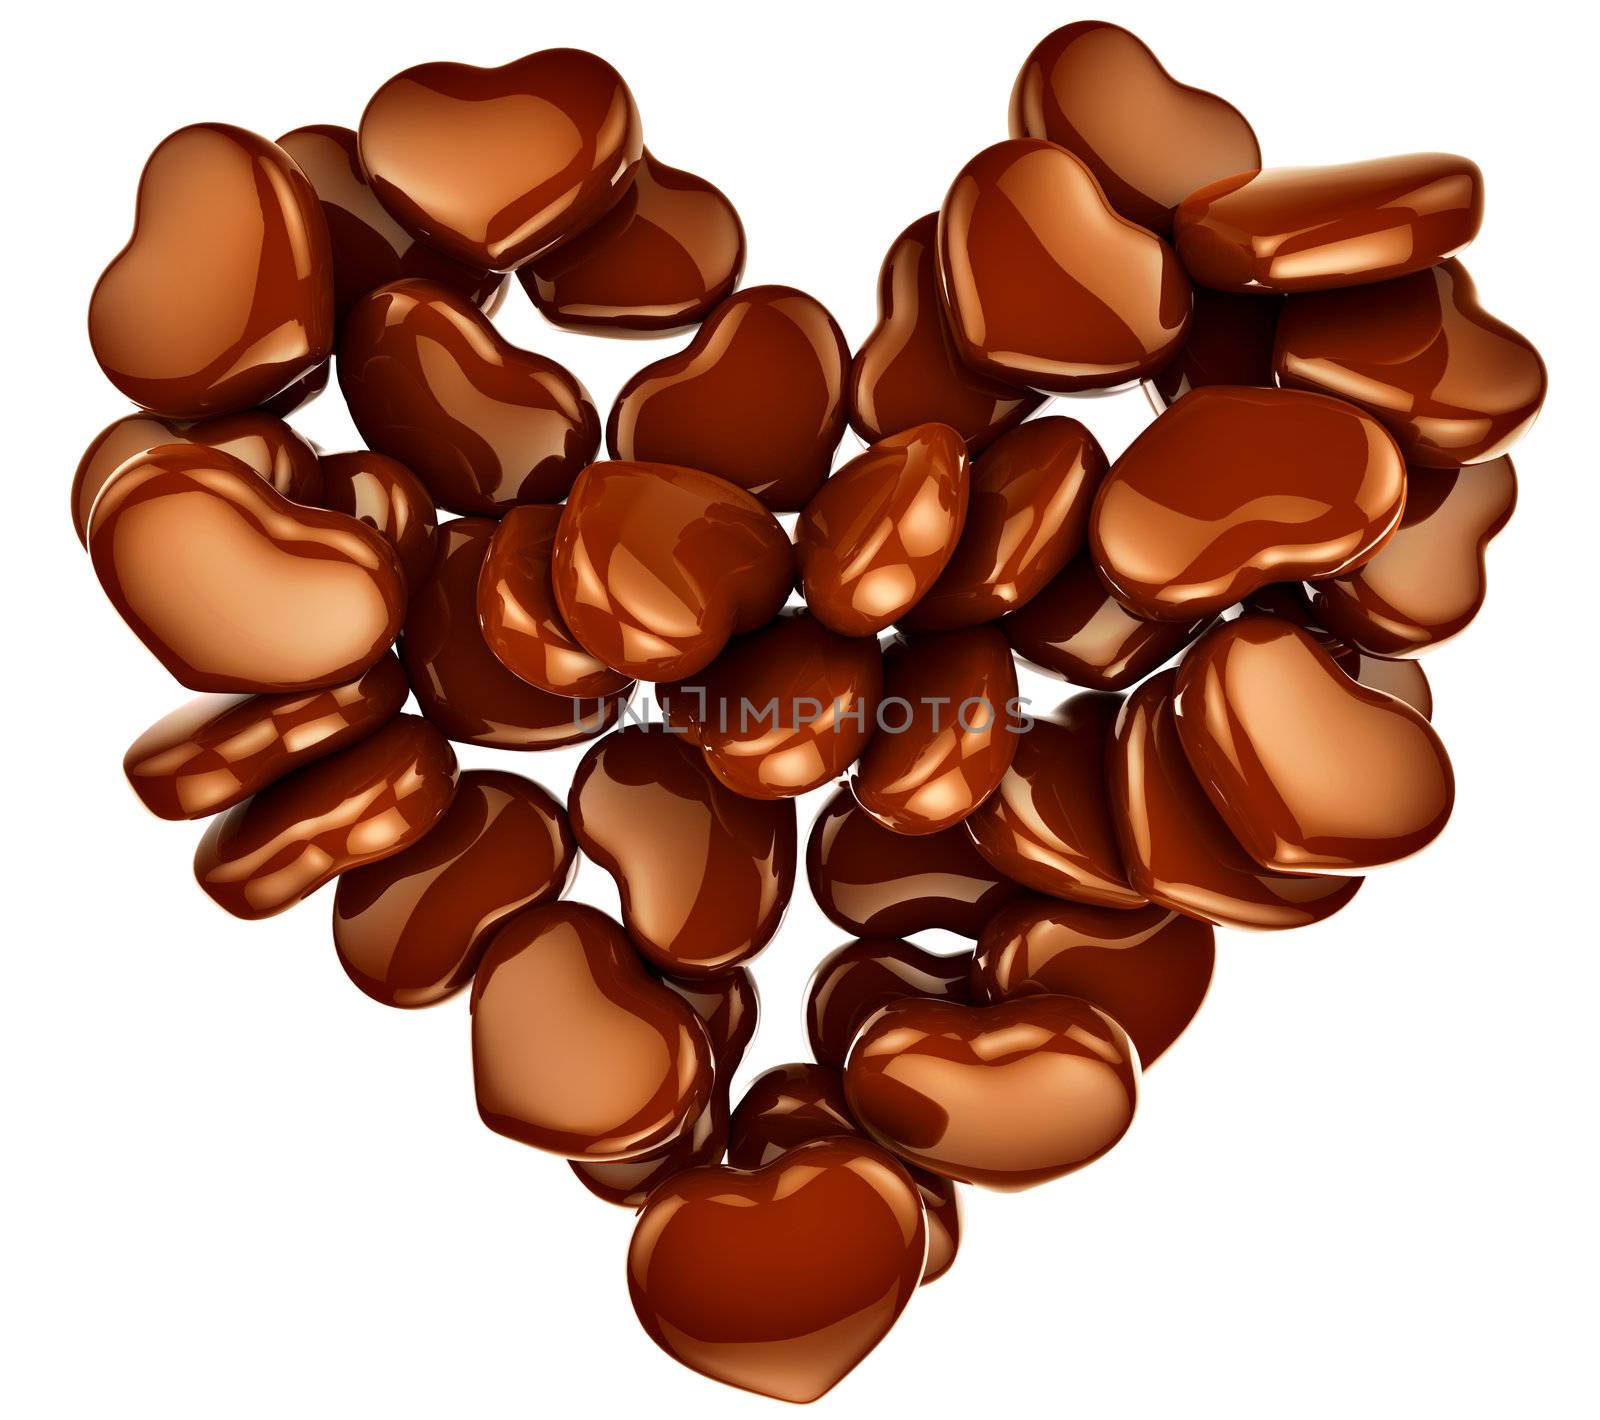 Allsorts milk chocolate in the form of heart as a sweet gift for perfect Valentine's Day.